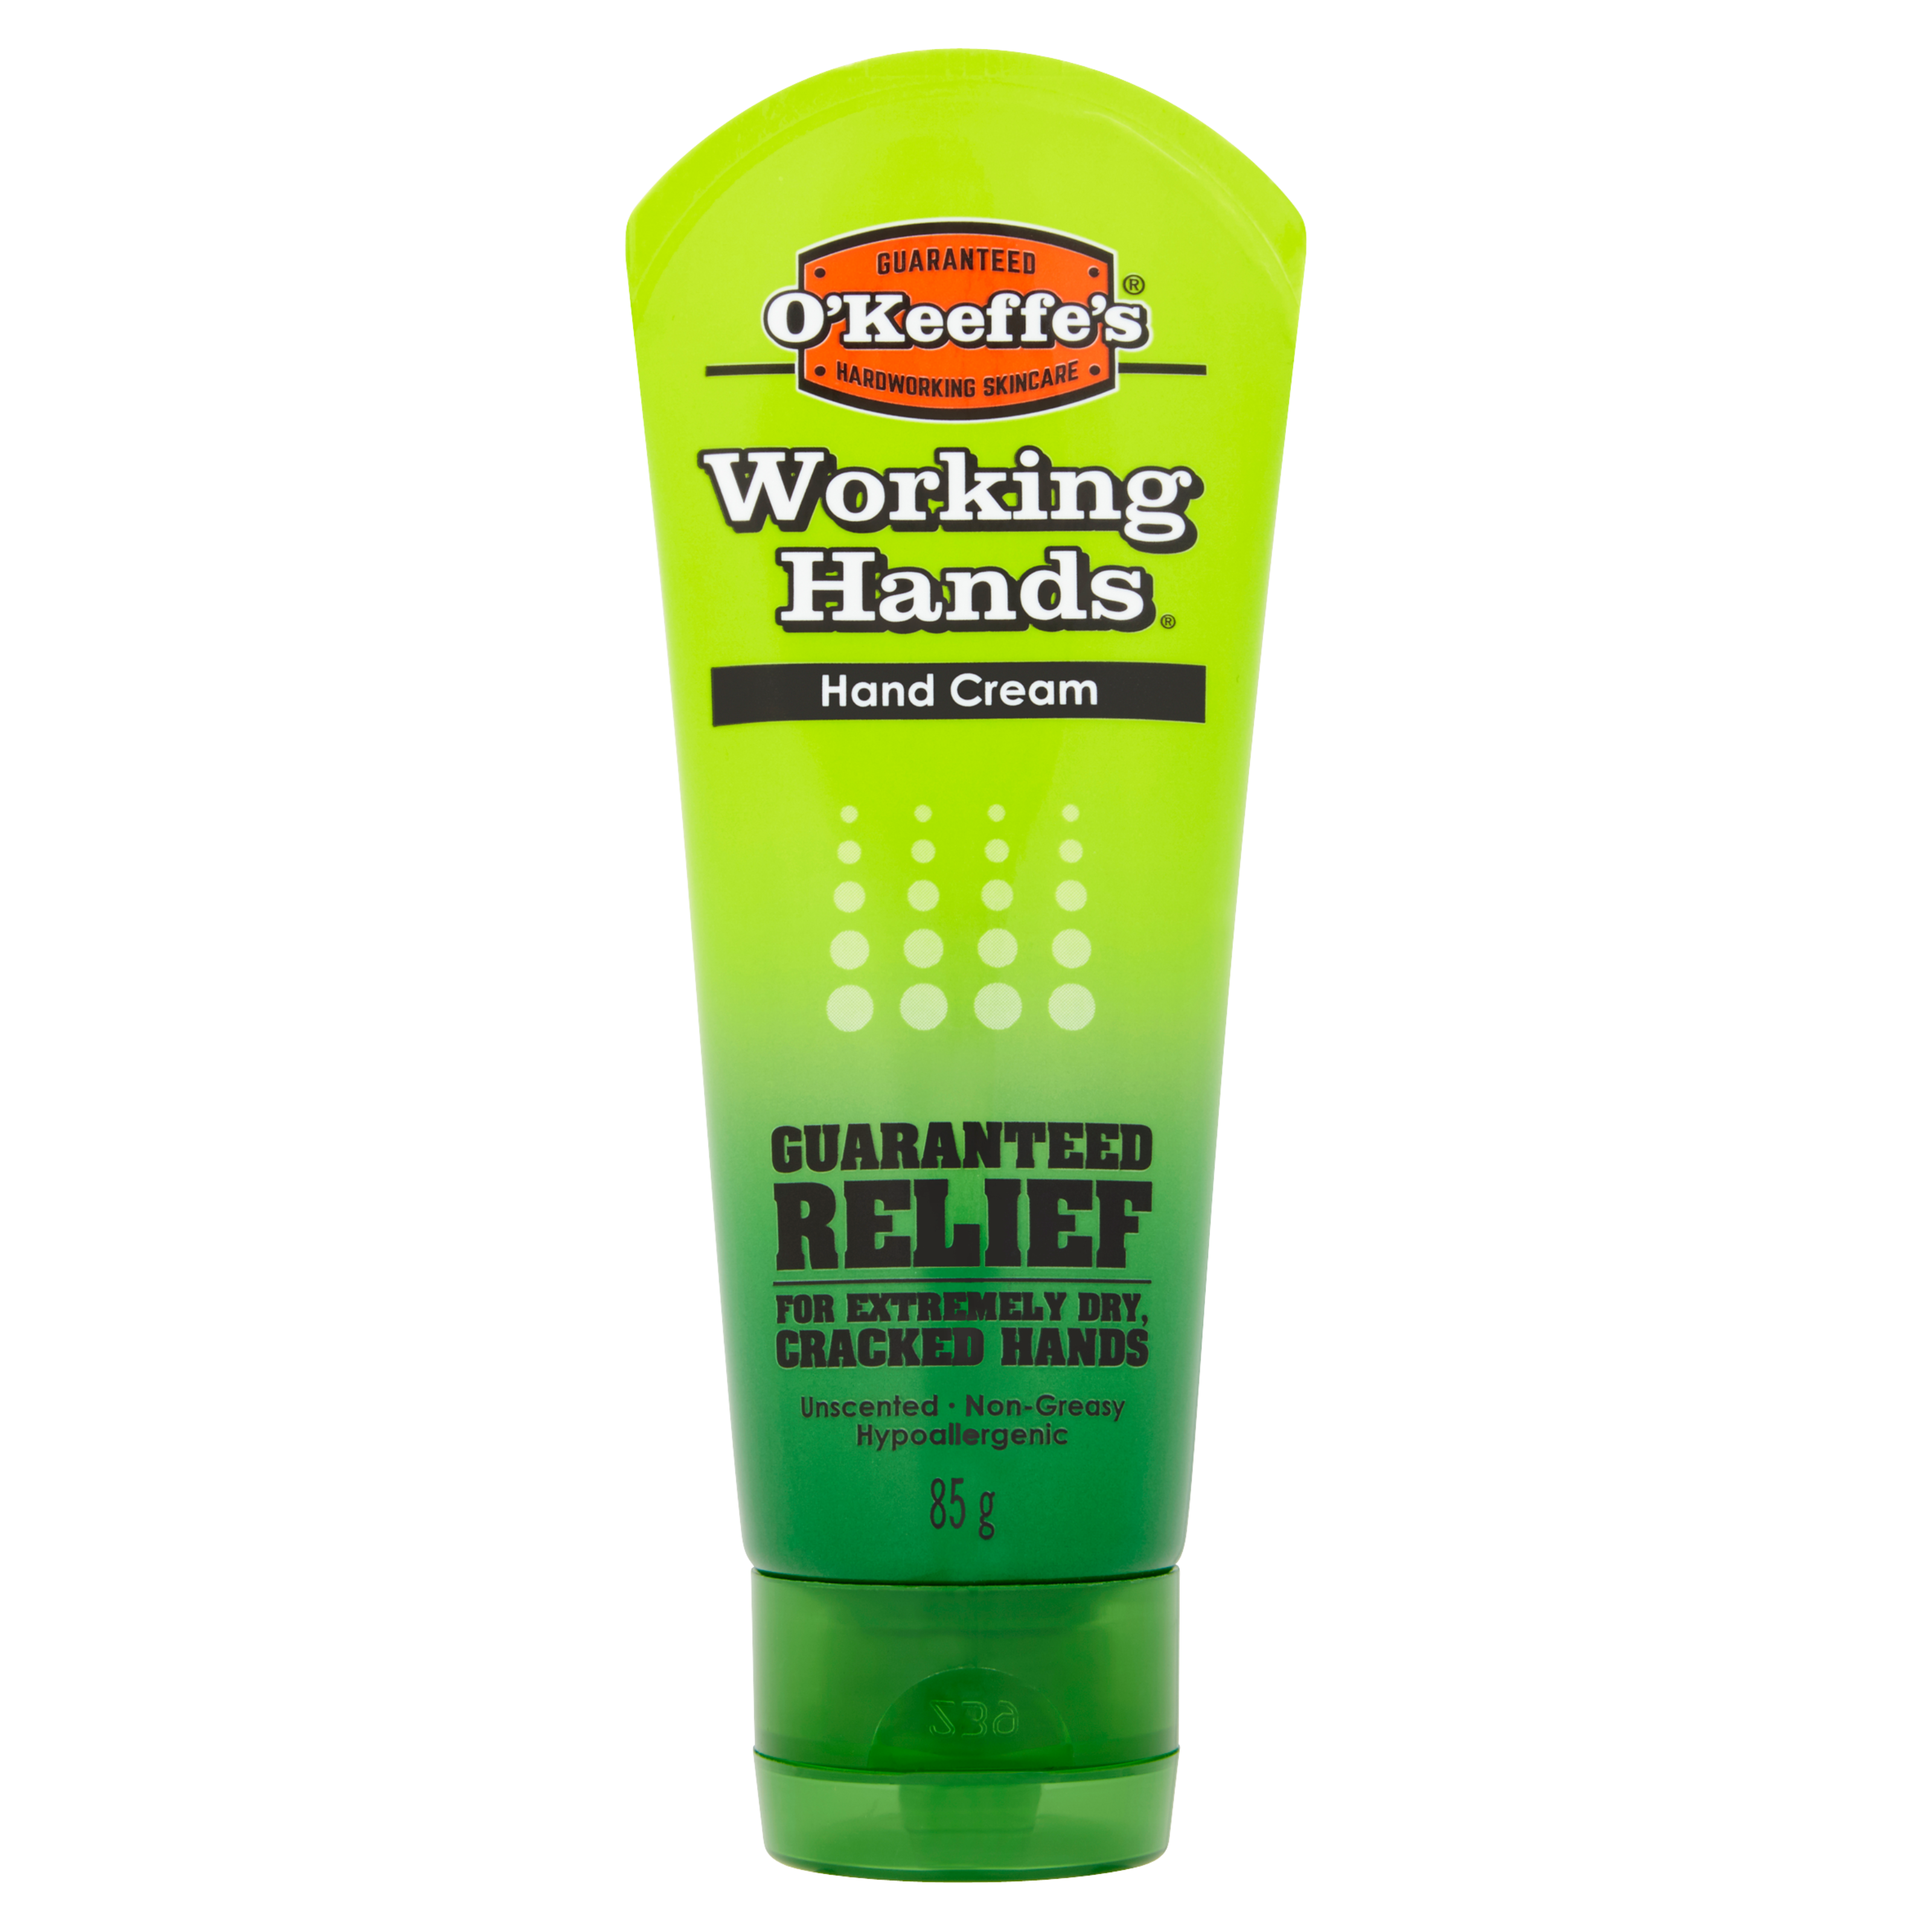 O'Keeffe's £6.50 Working Hands cream loved by builders hailed